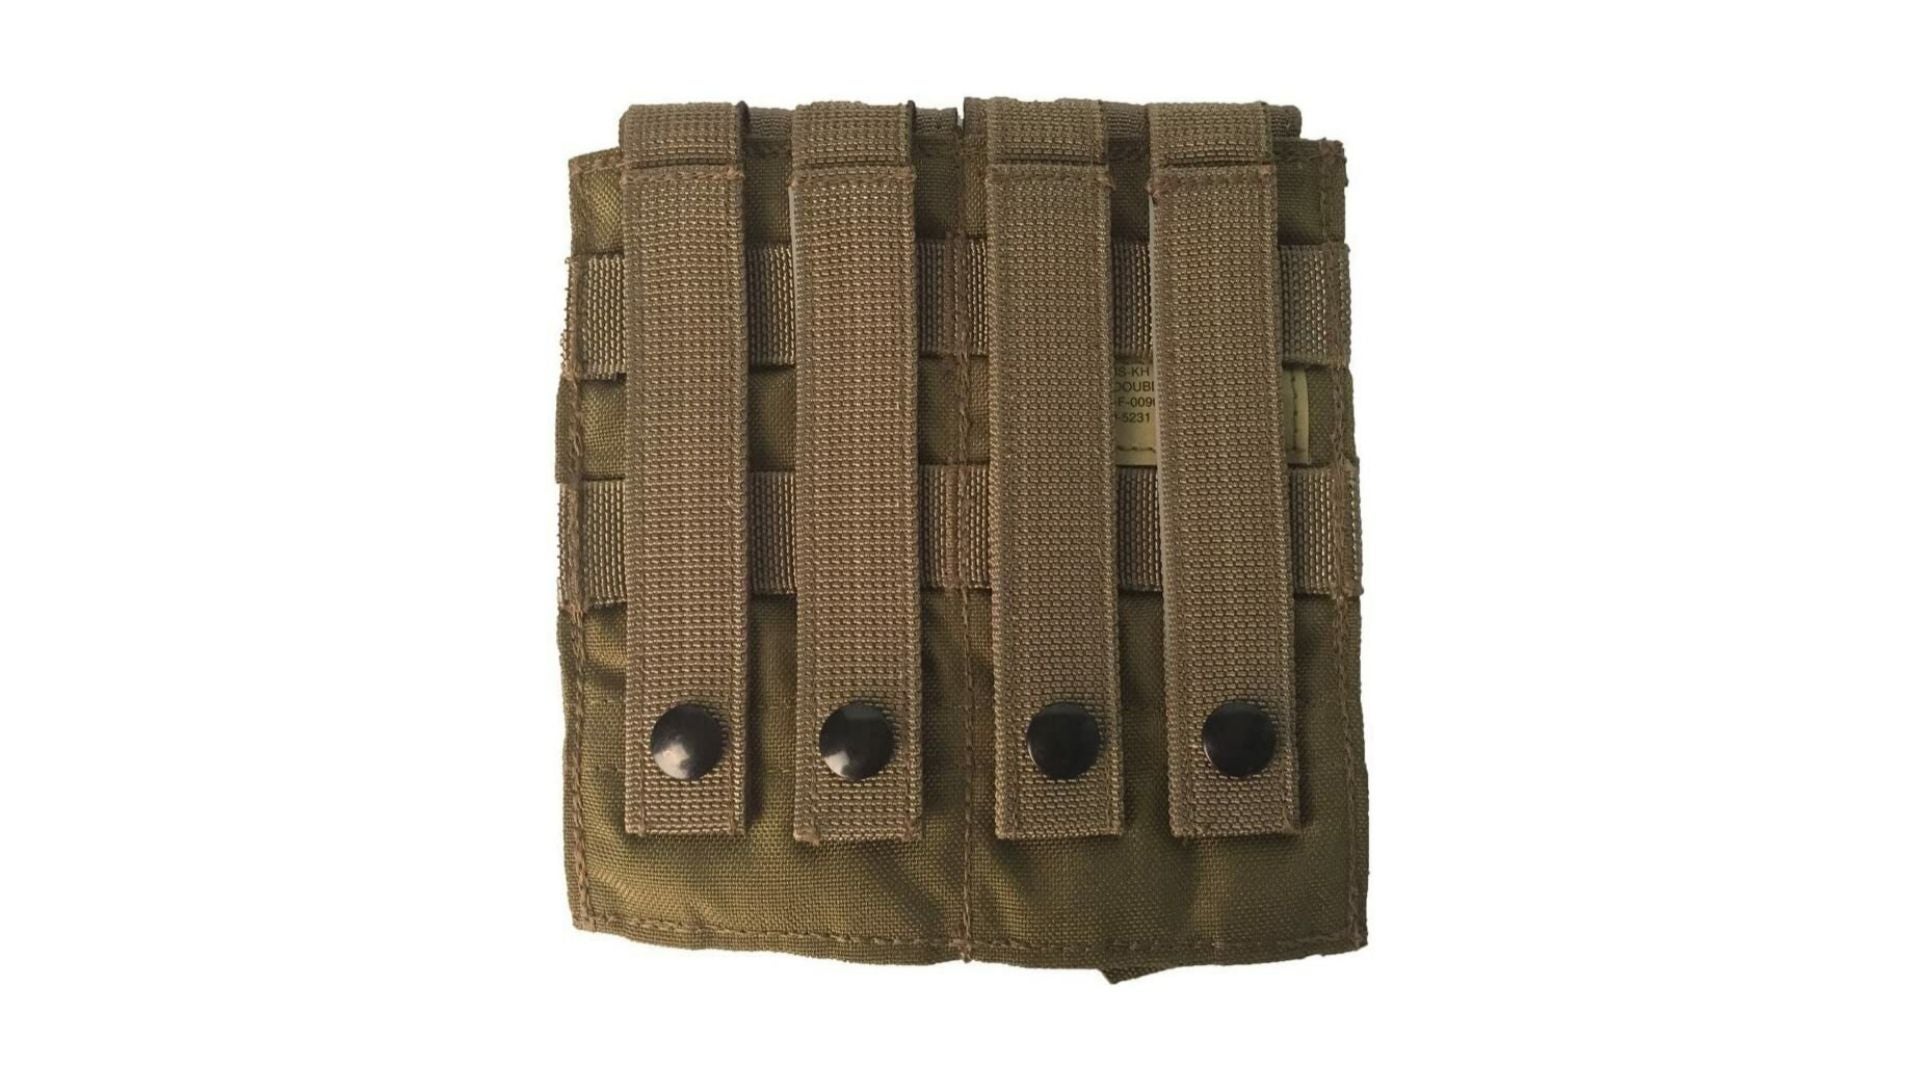 New USMC Surplus Tan Padded Pouch Case with MOLLE fasteners Good 4 General Use 